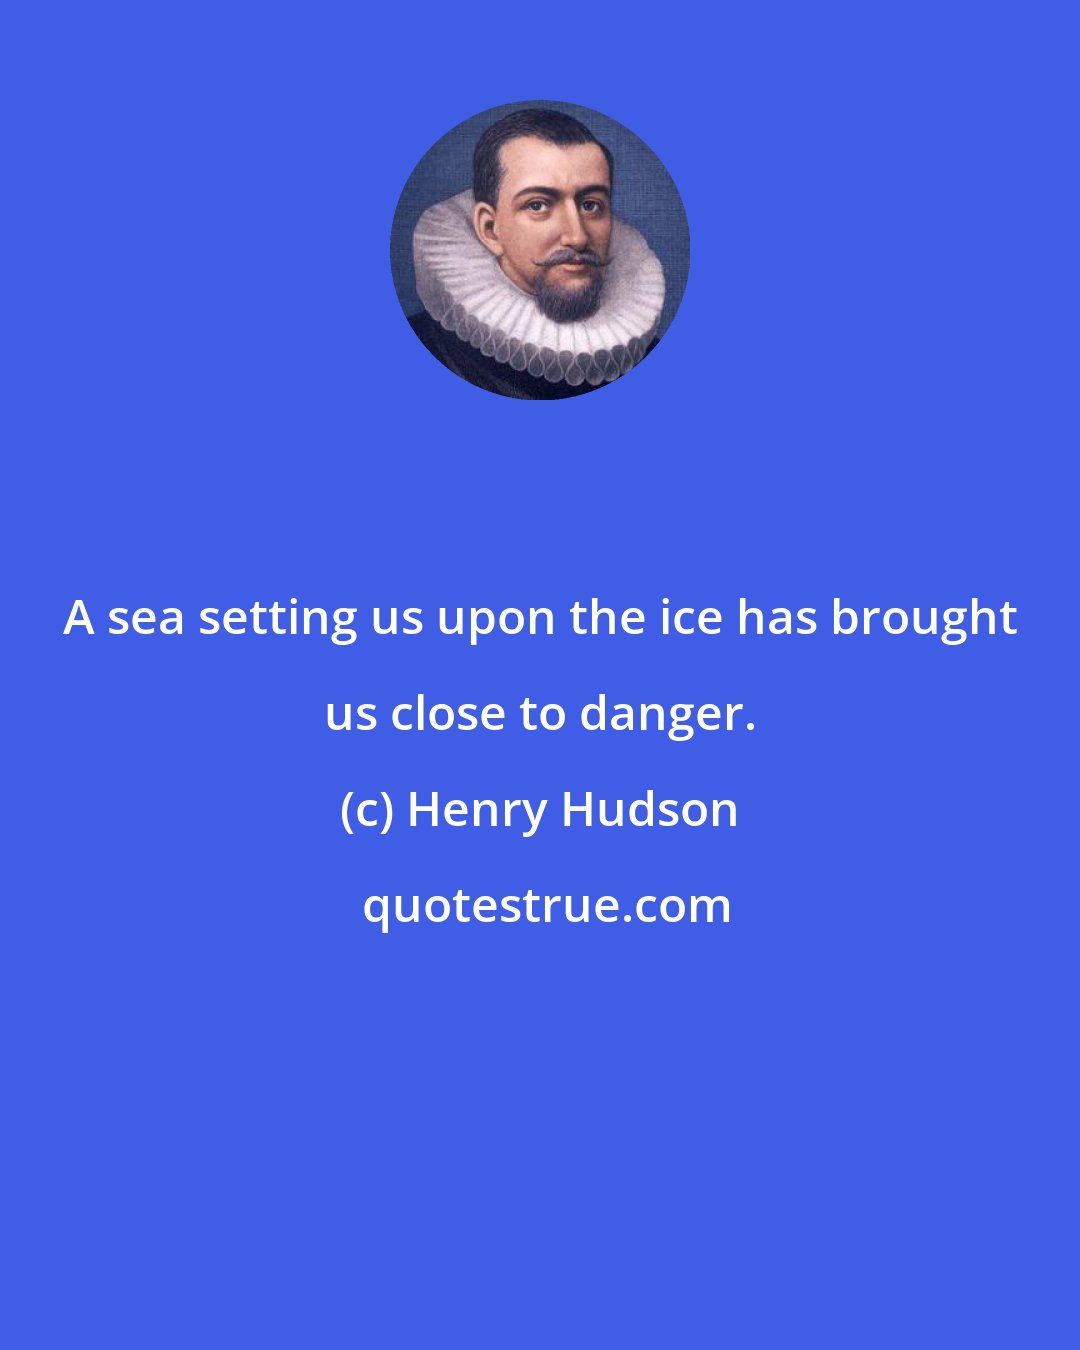 Henry Hudson: A sea setting us upon the ice has brought us close to danger.